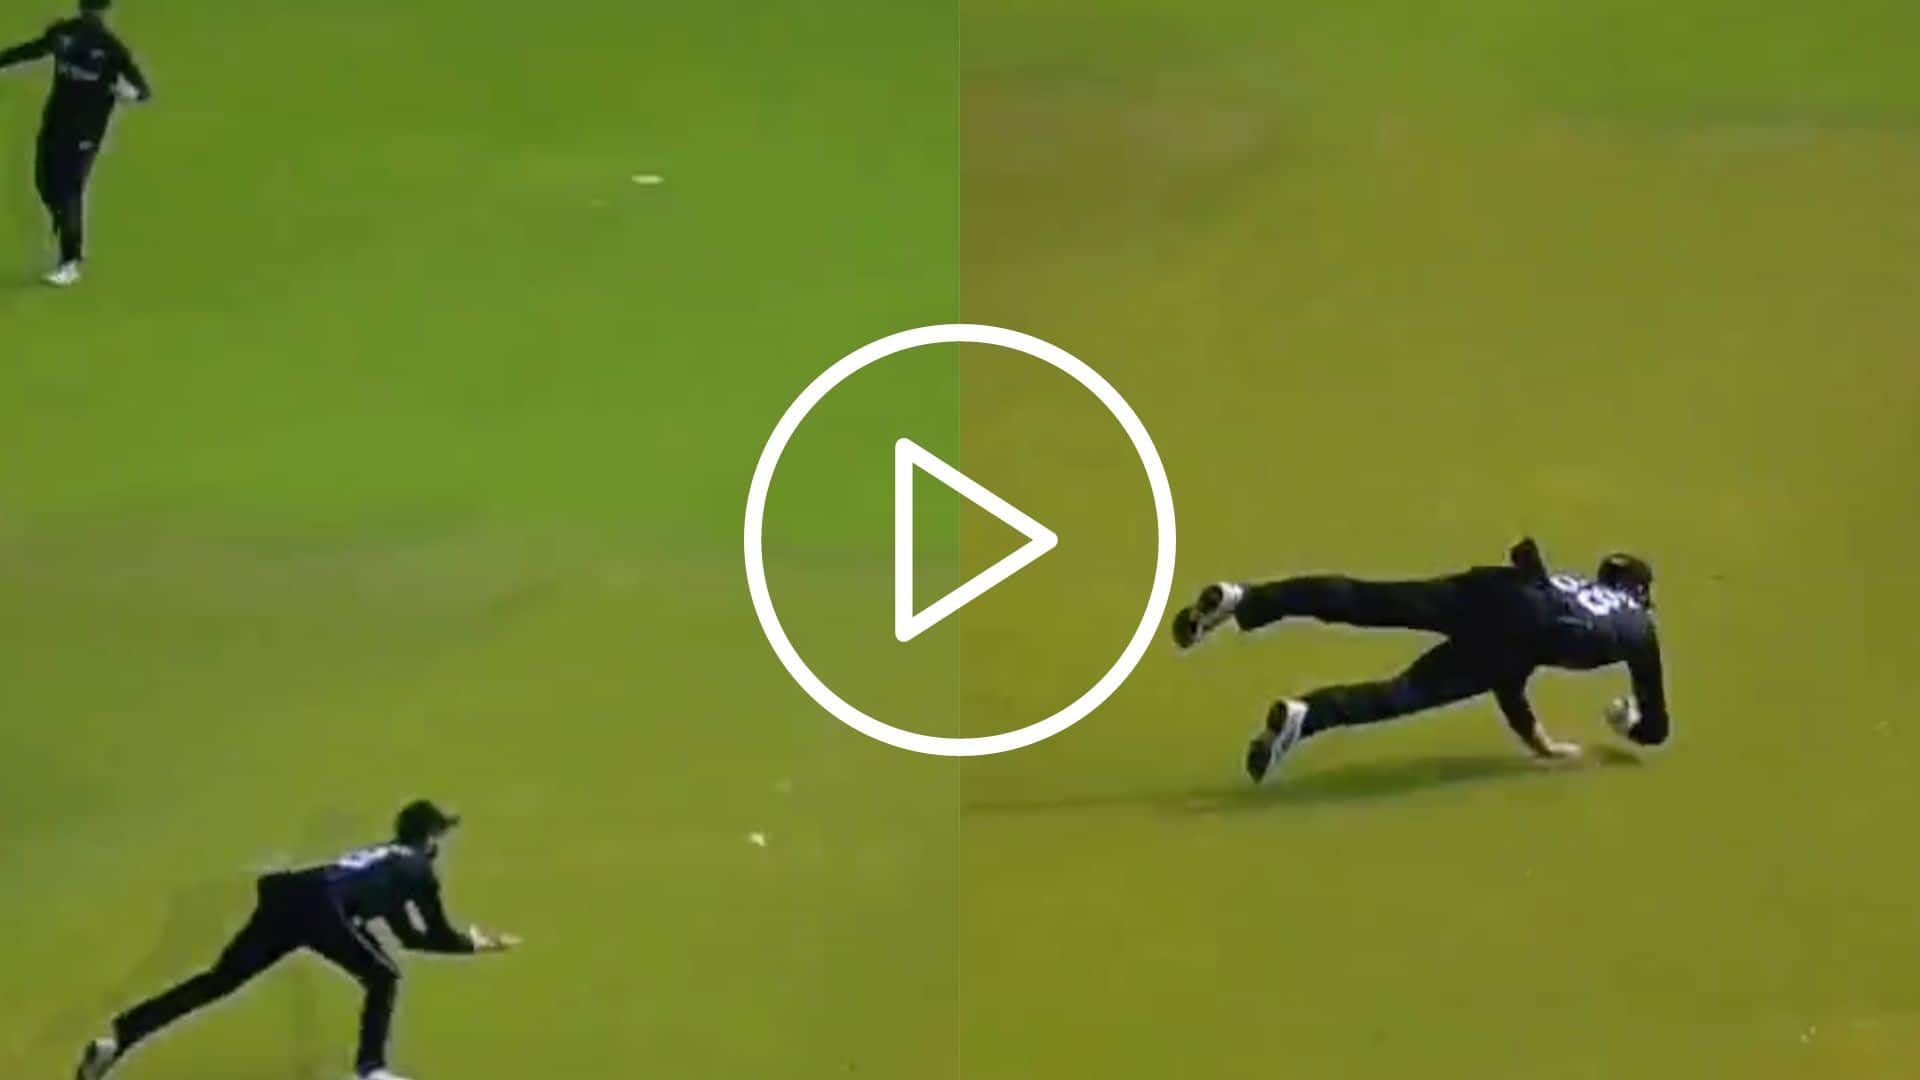 [Watch] Devon Conway Stuns Najmul Hossain Shanto With An ‘Outrageous’ Diving Catch